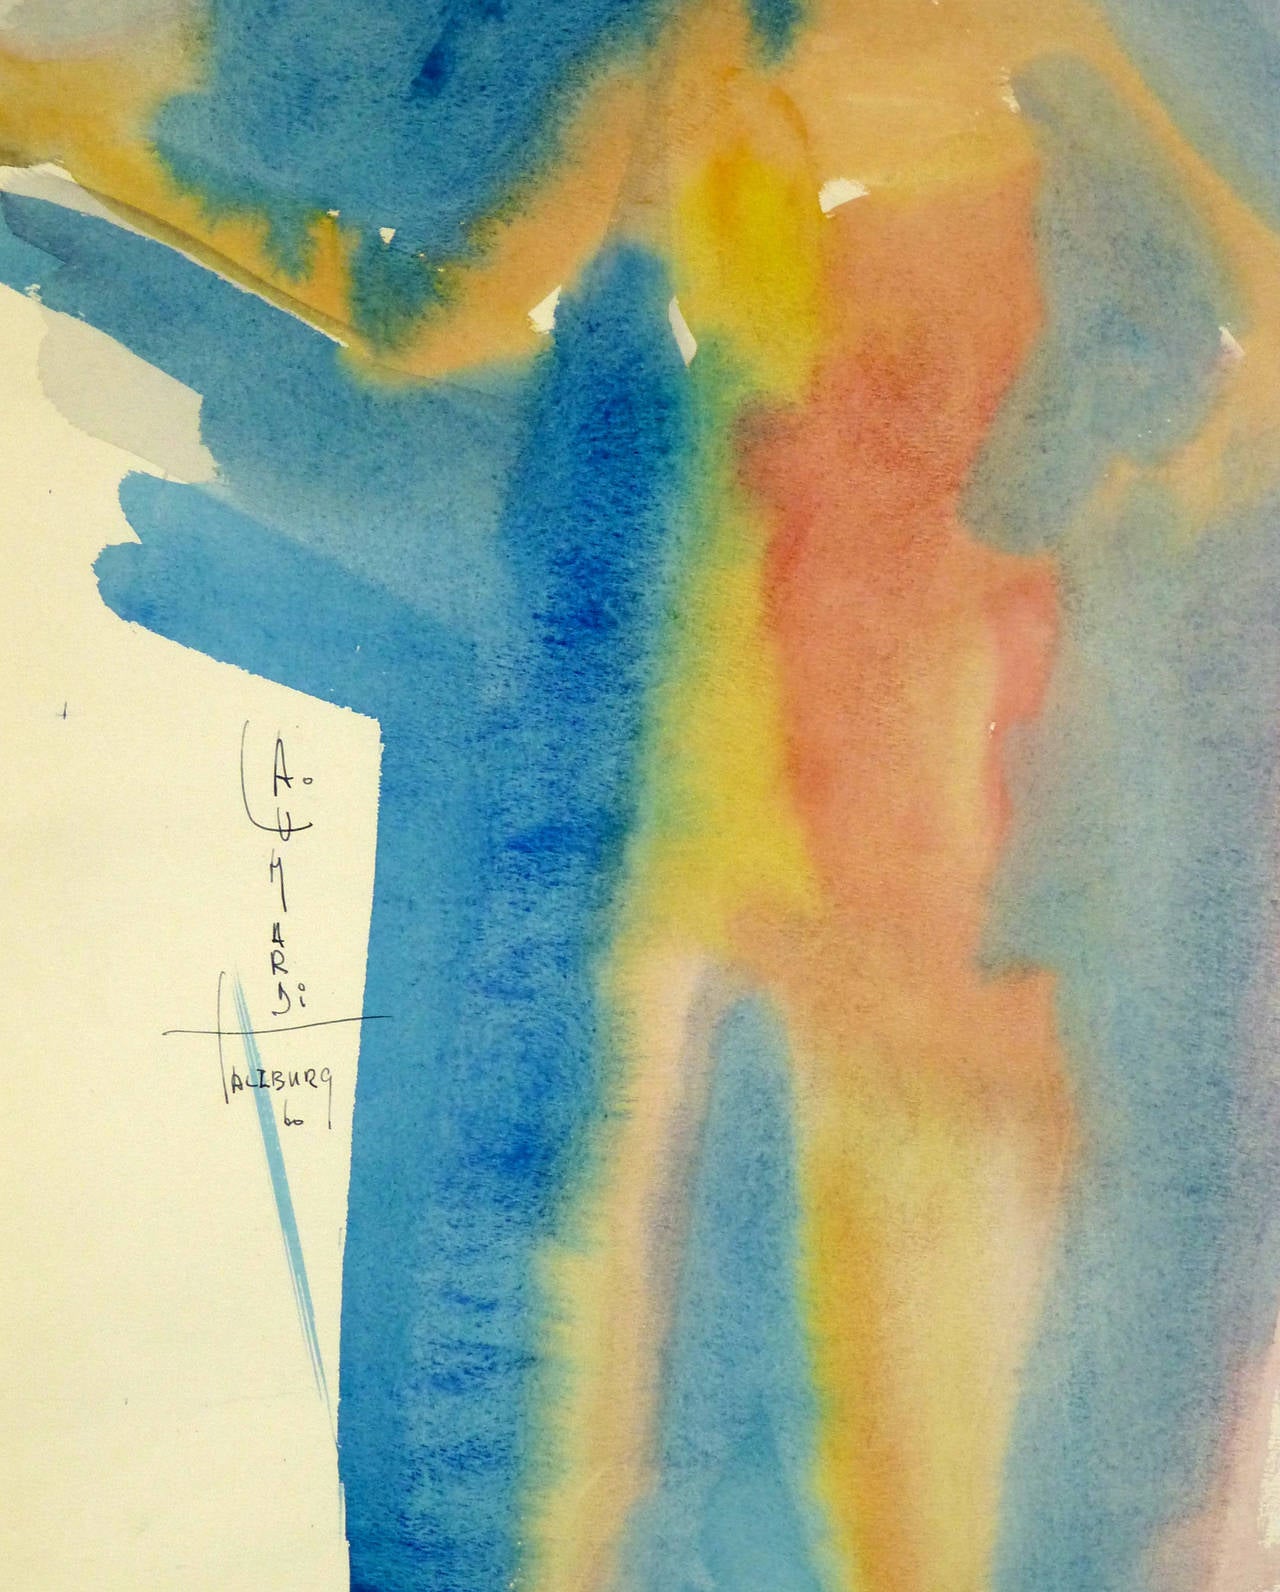 Fanciful watercolor female nude abstract with auburn hair by artist L. Aumardi, 1960. Signed and dated middle left. Titled: Salzburg.

Original one-of-a-kind vintage work of art on paper displayed on a white mat with a gold border and fits a